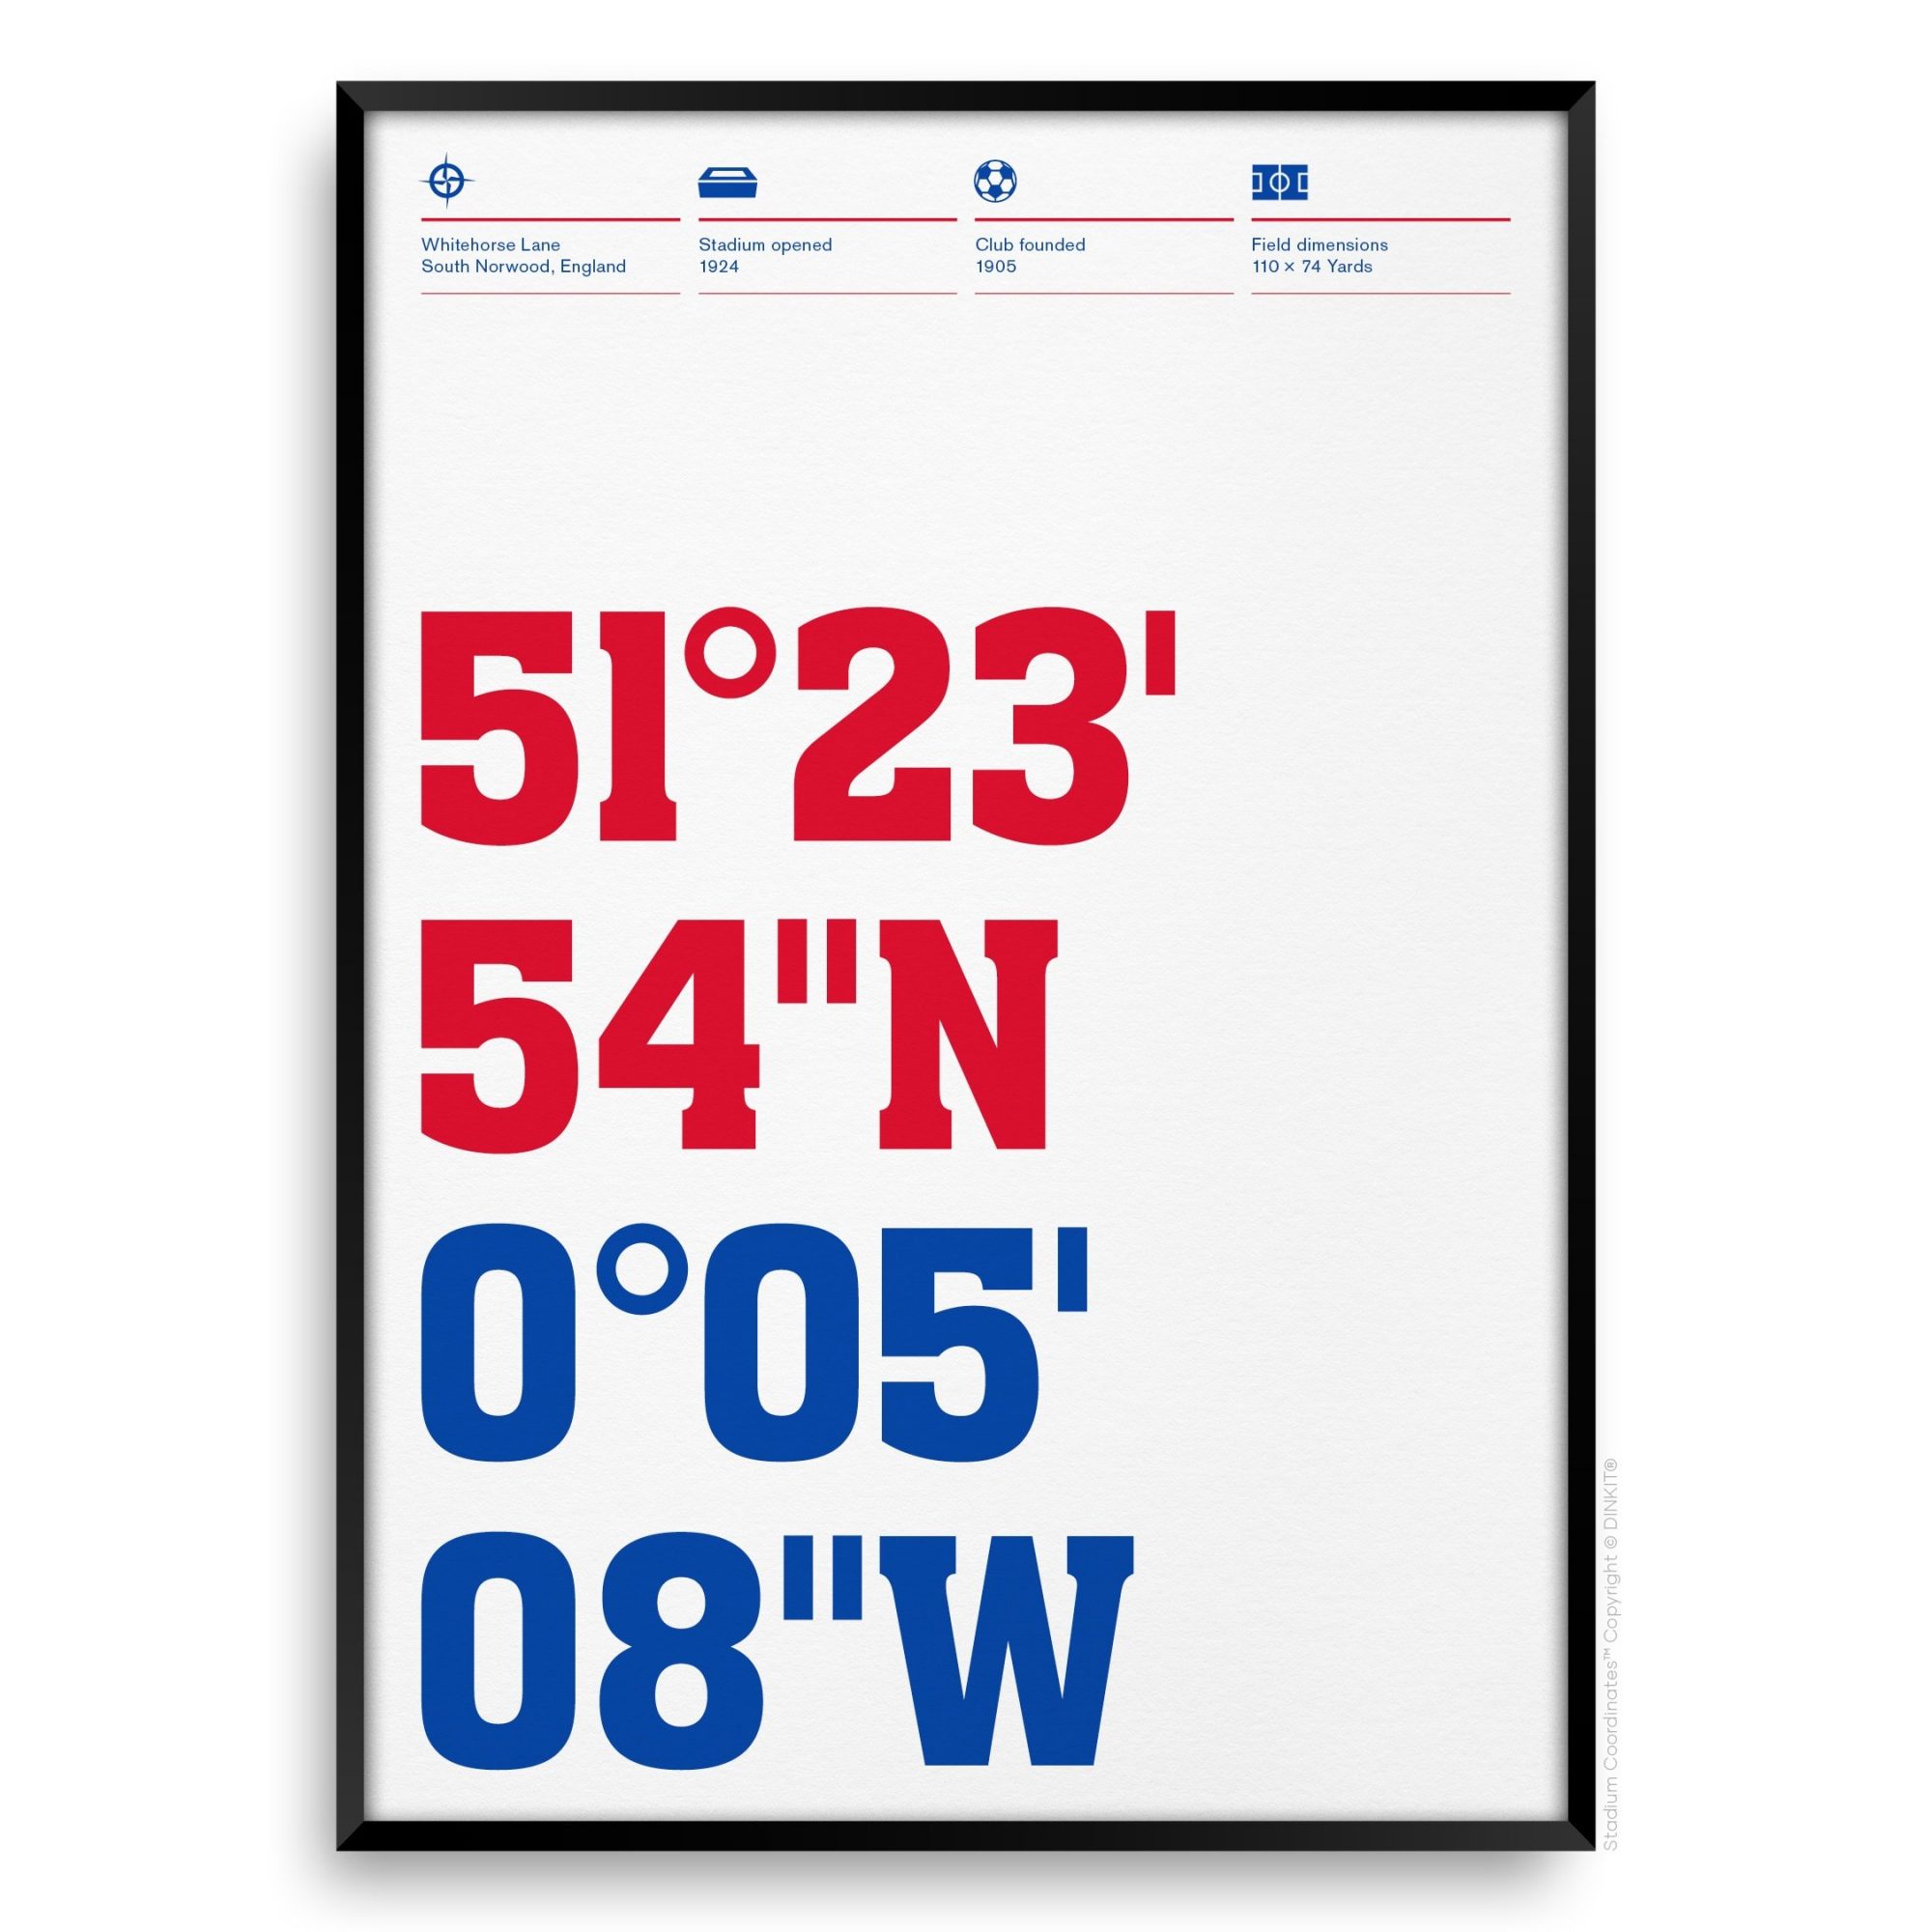 Crystal Palace Gifts, Football Posters, Gift Ideas